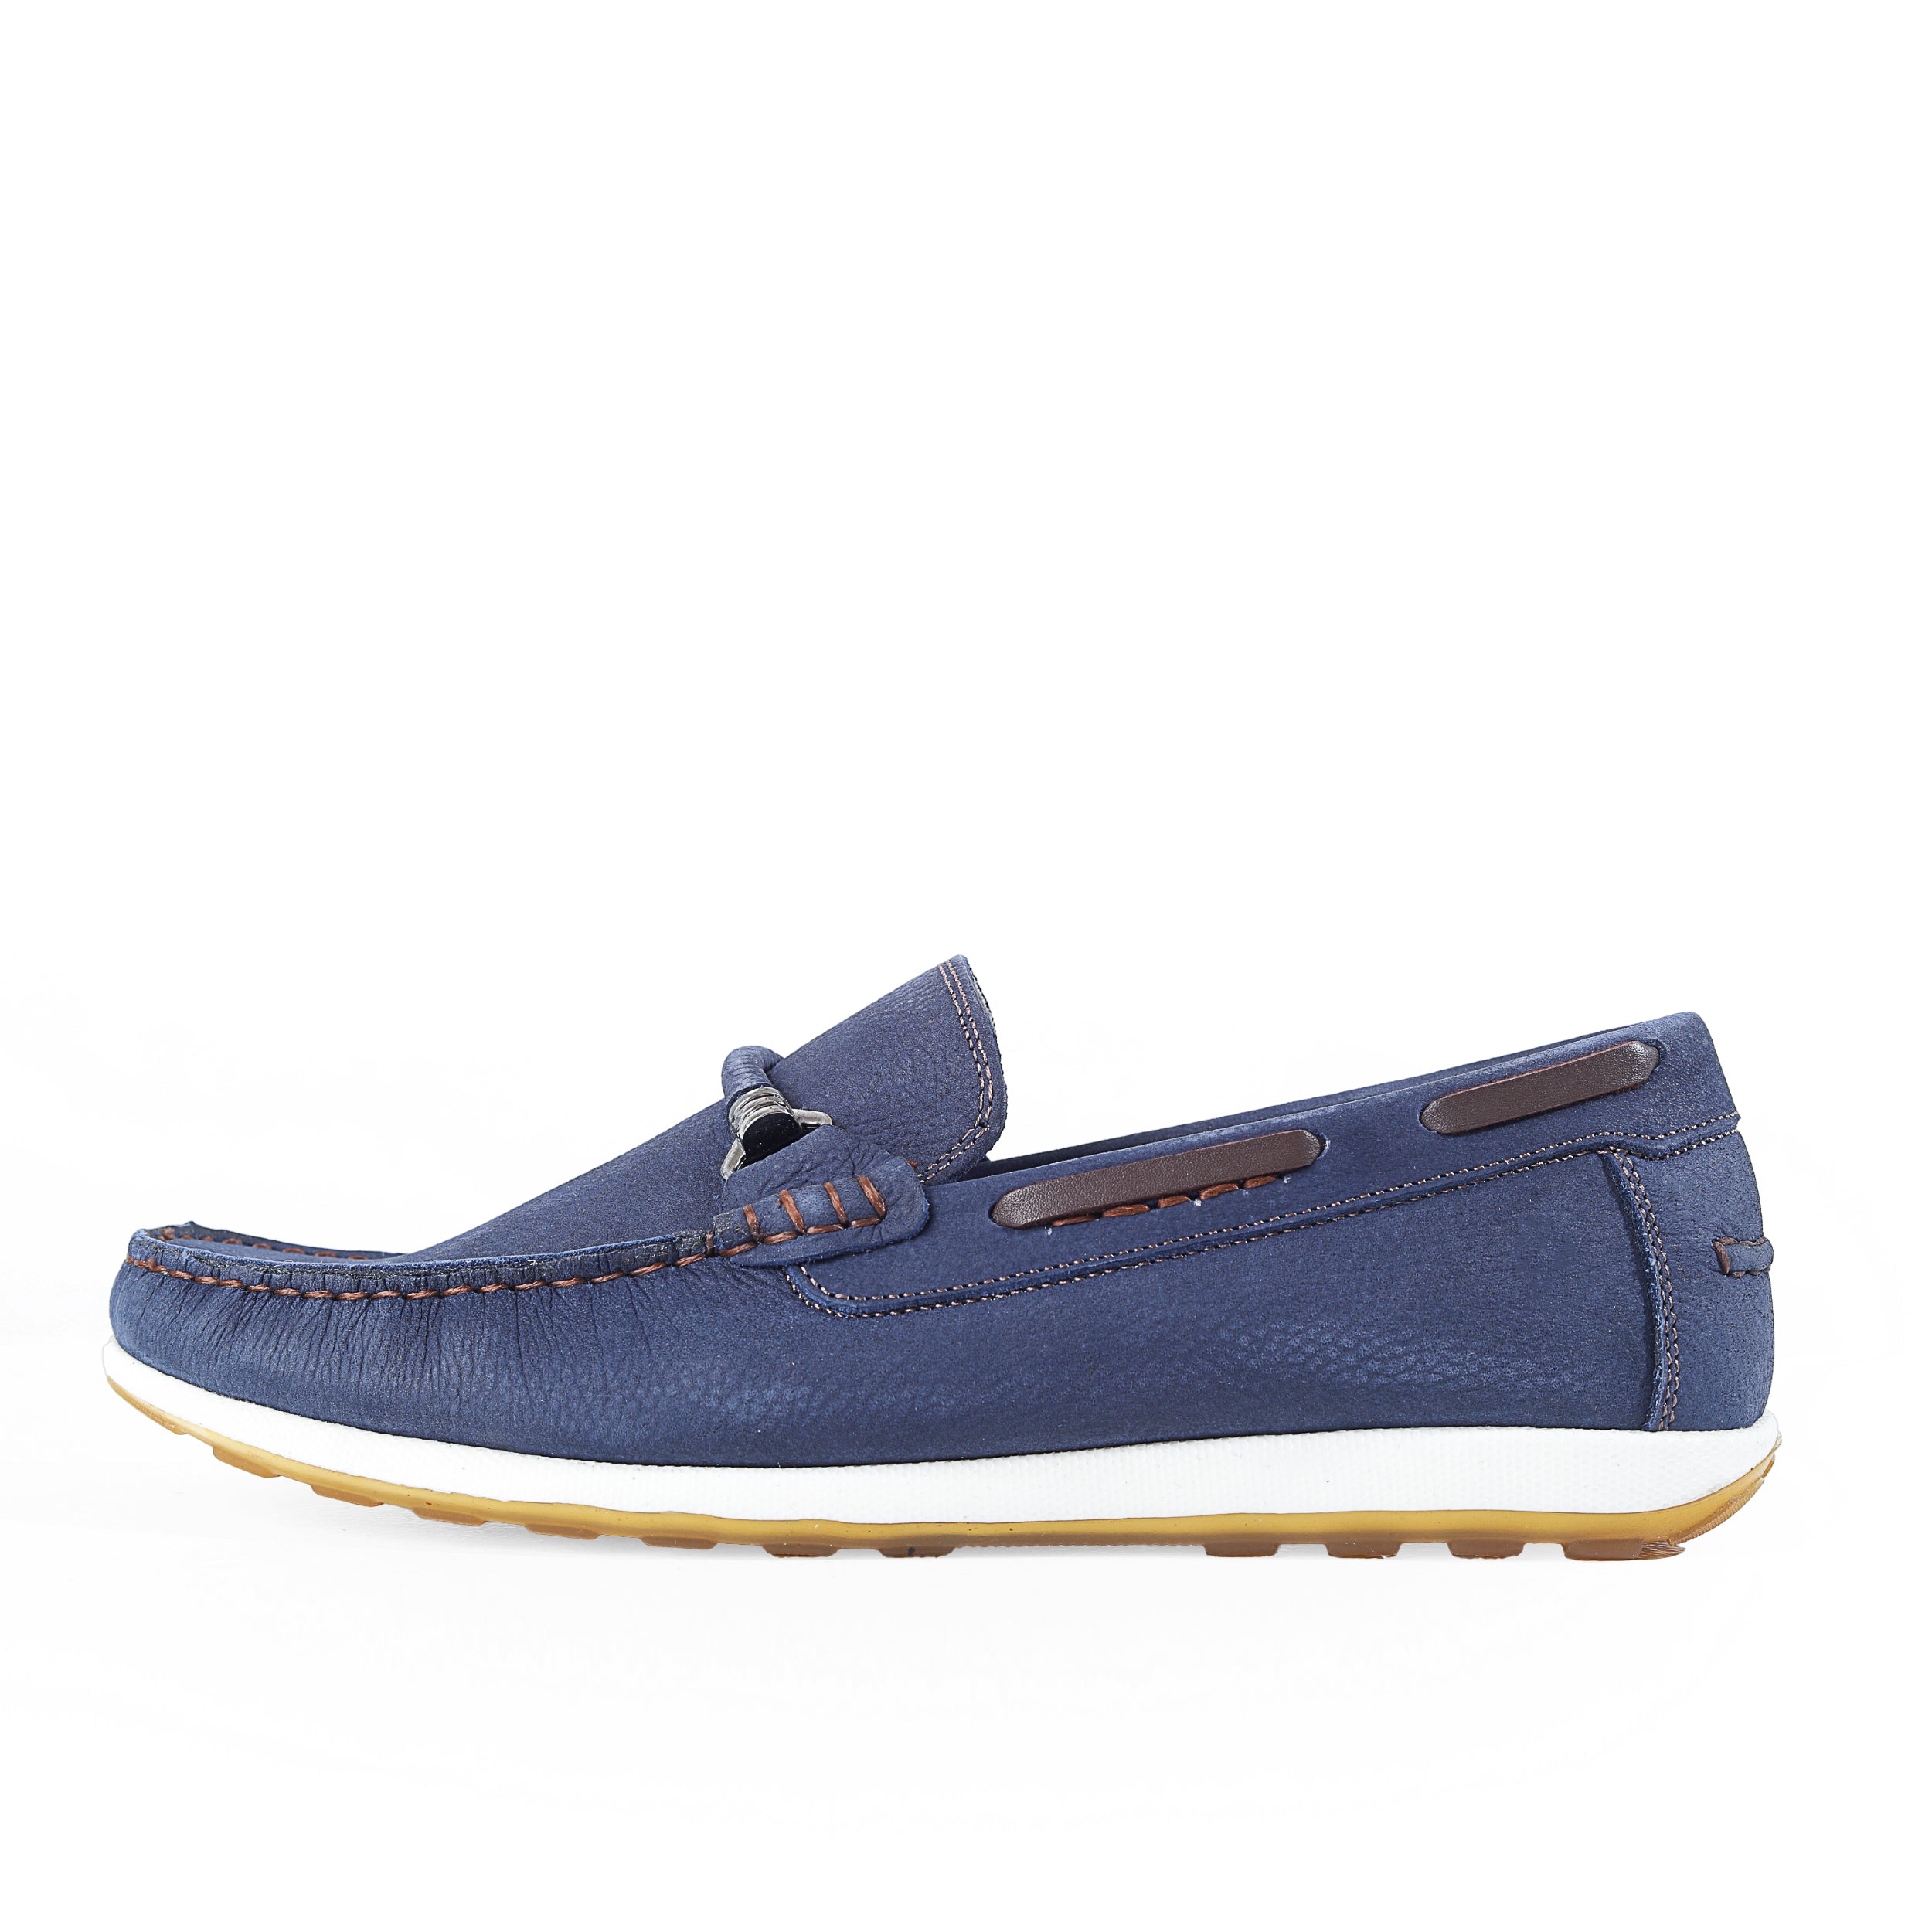 Hush Puppies Suede Loafers Shoes 4806